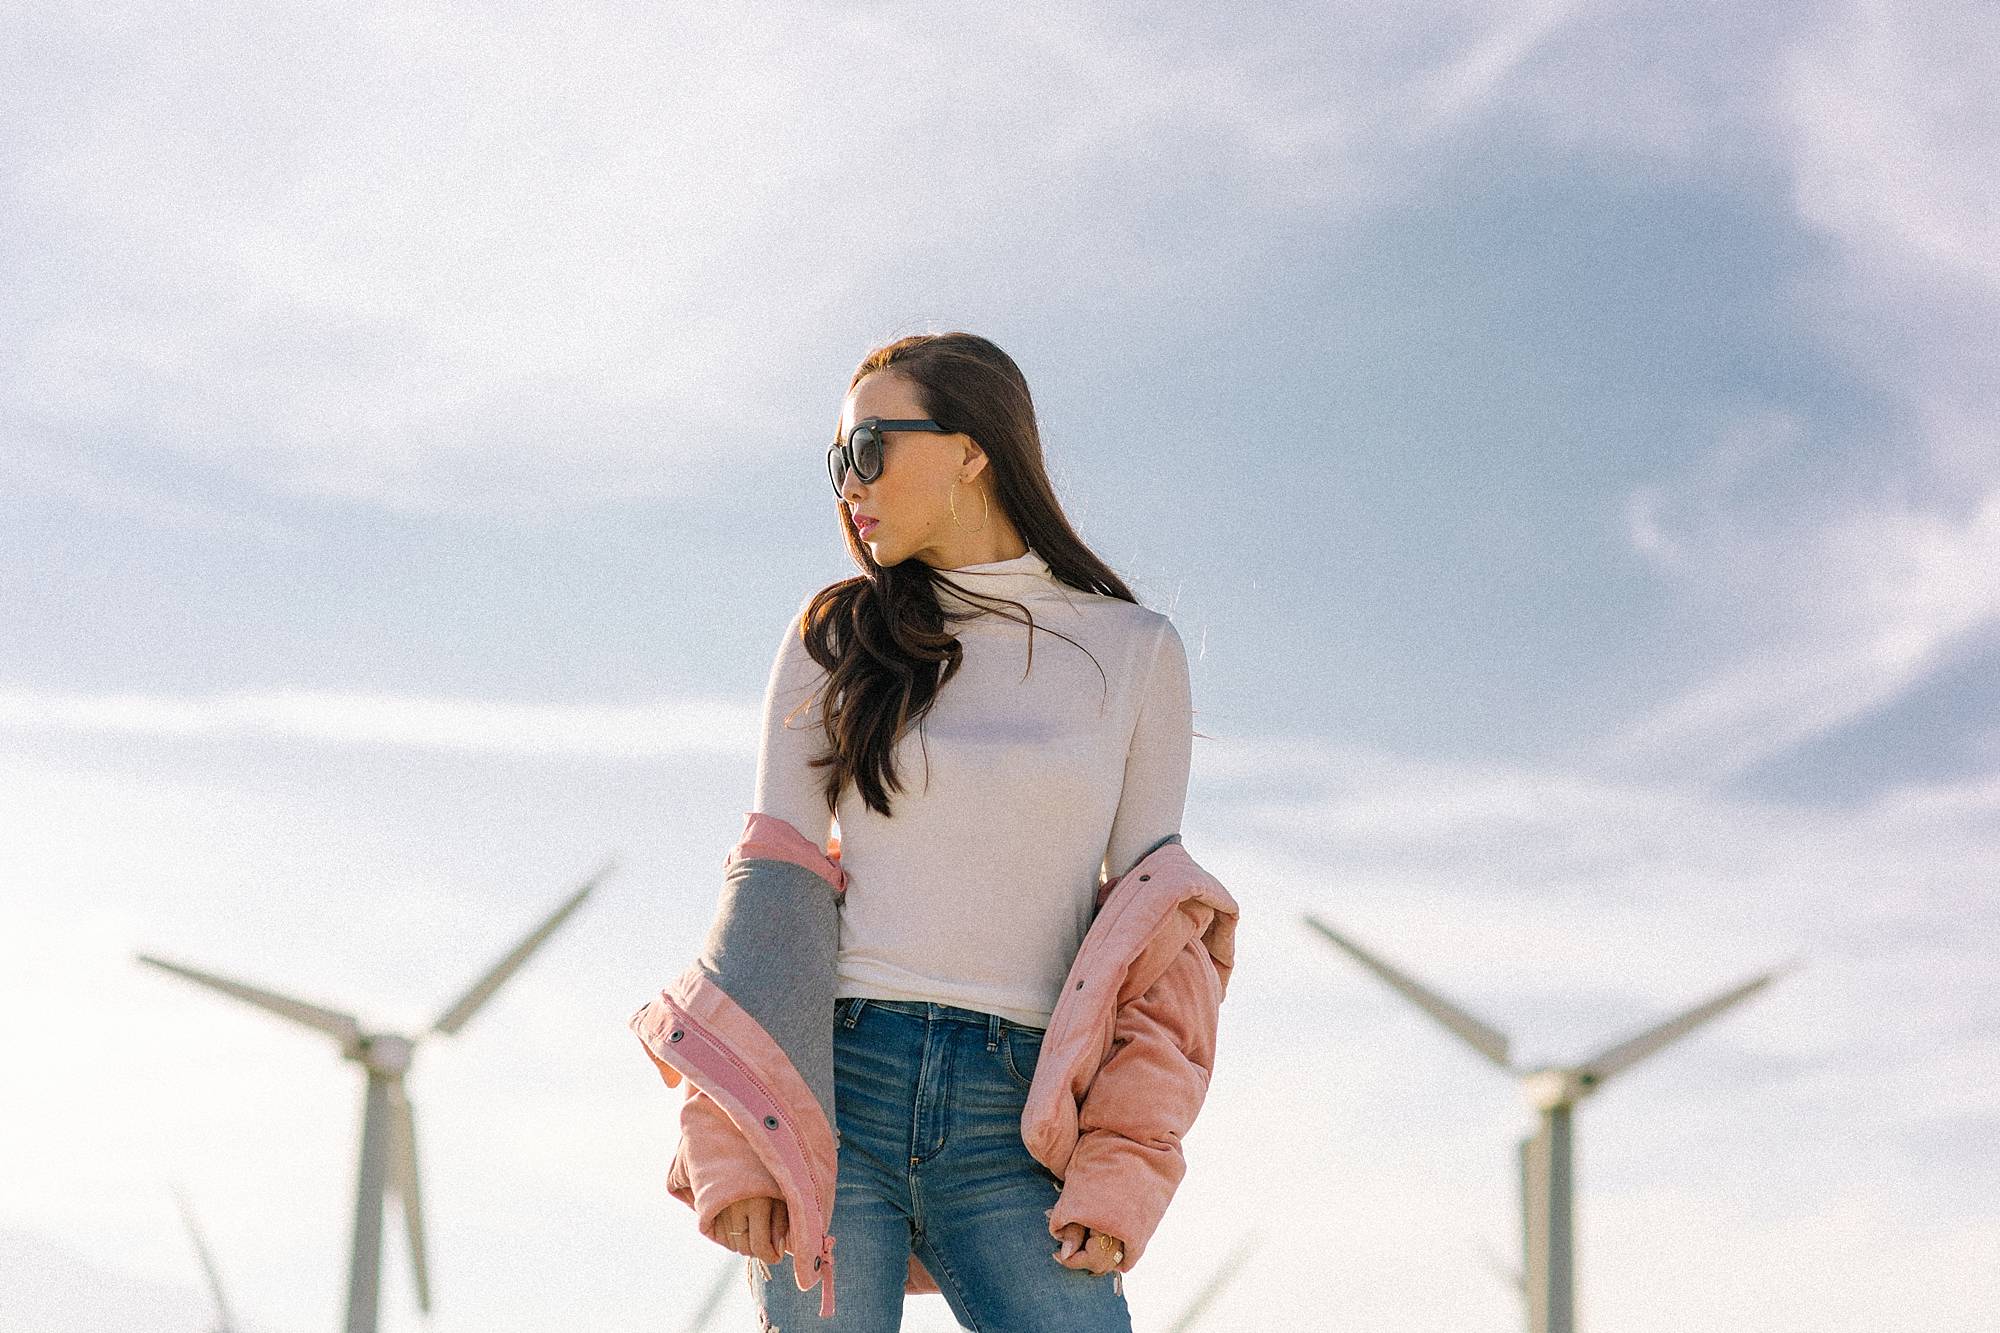 Palm Springs windmills windmill tour pink velvet puffer jacket embroidered floral jeans Abercrombie and tecovas boots on Phoenix lifestyle blogger Diana Elizabeth